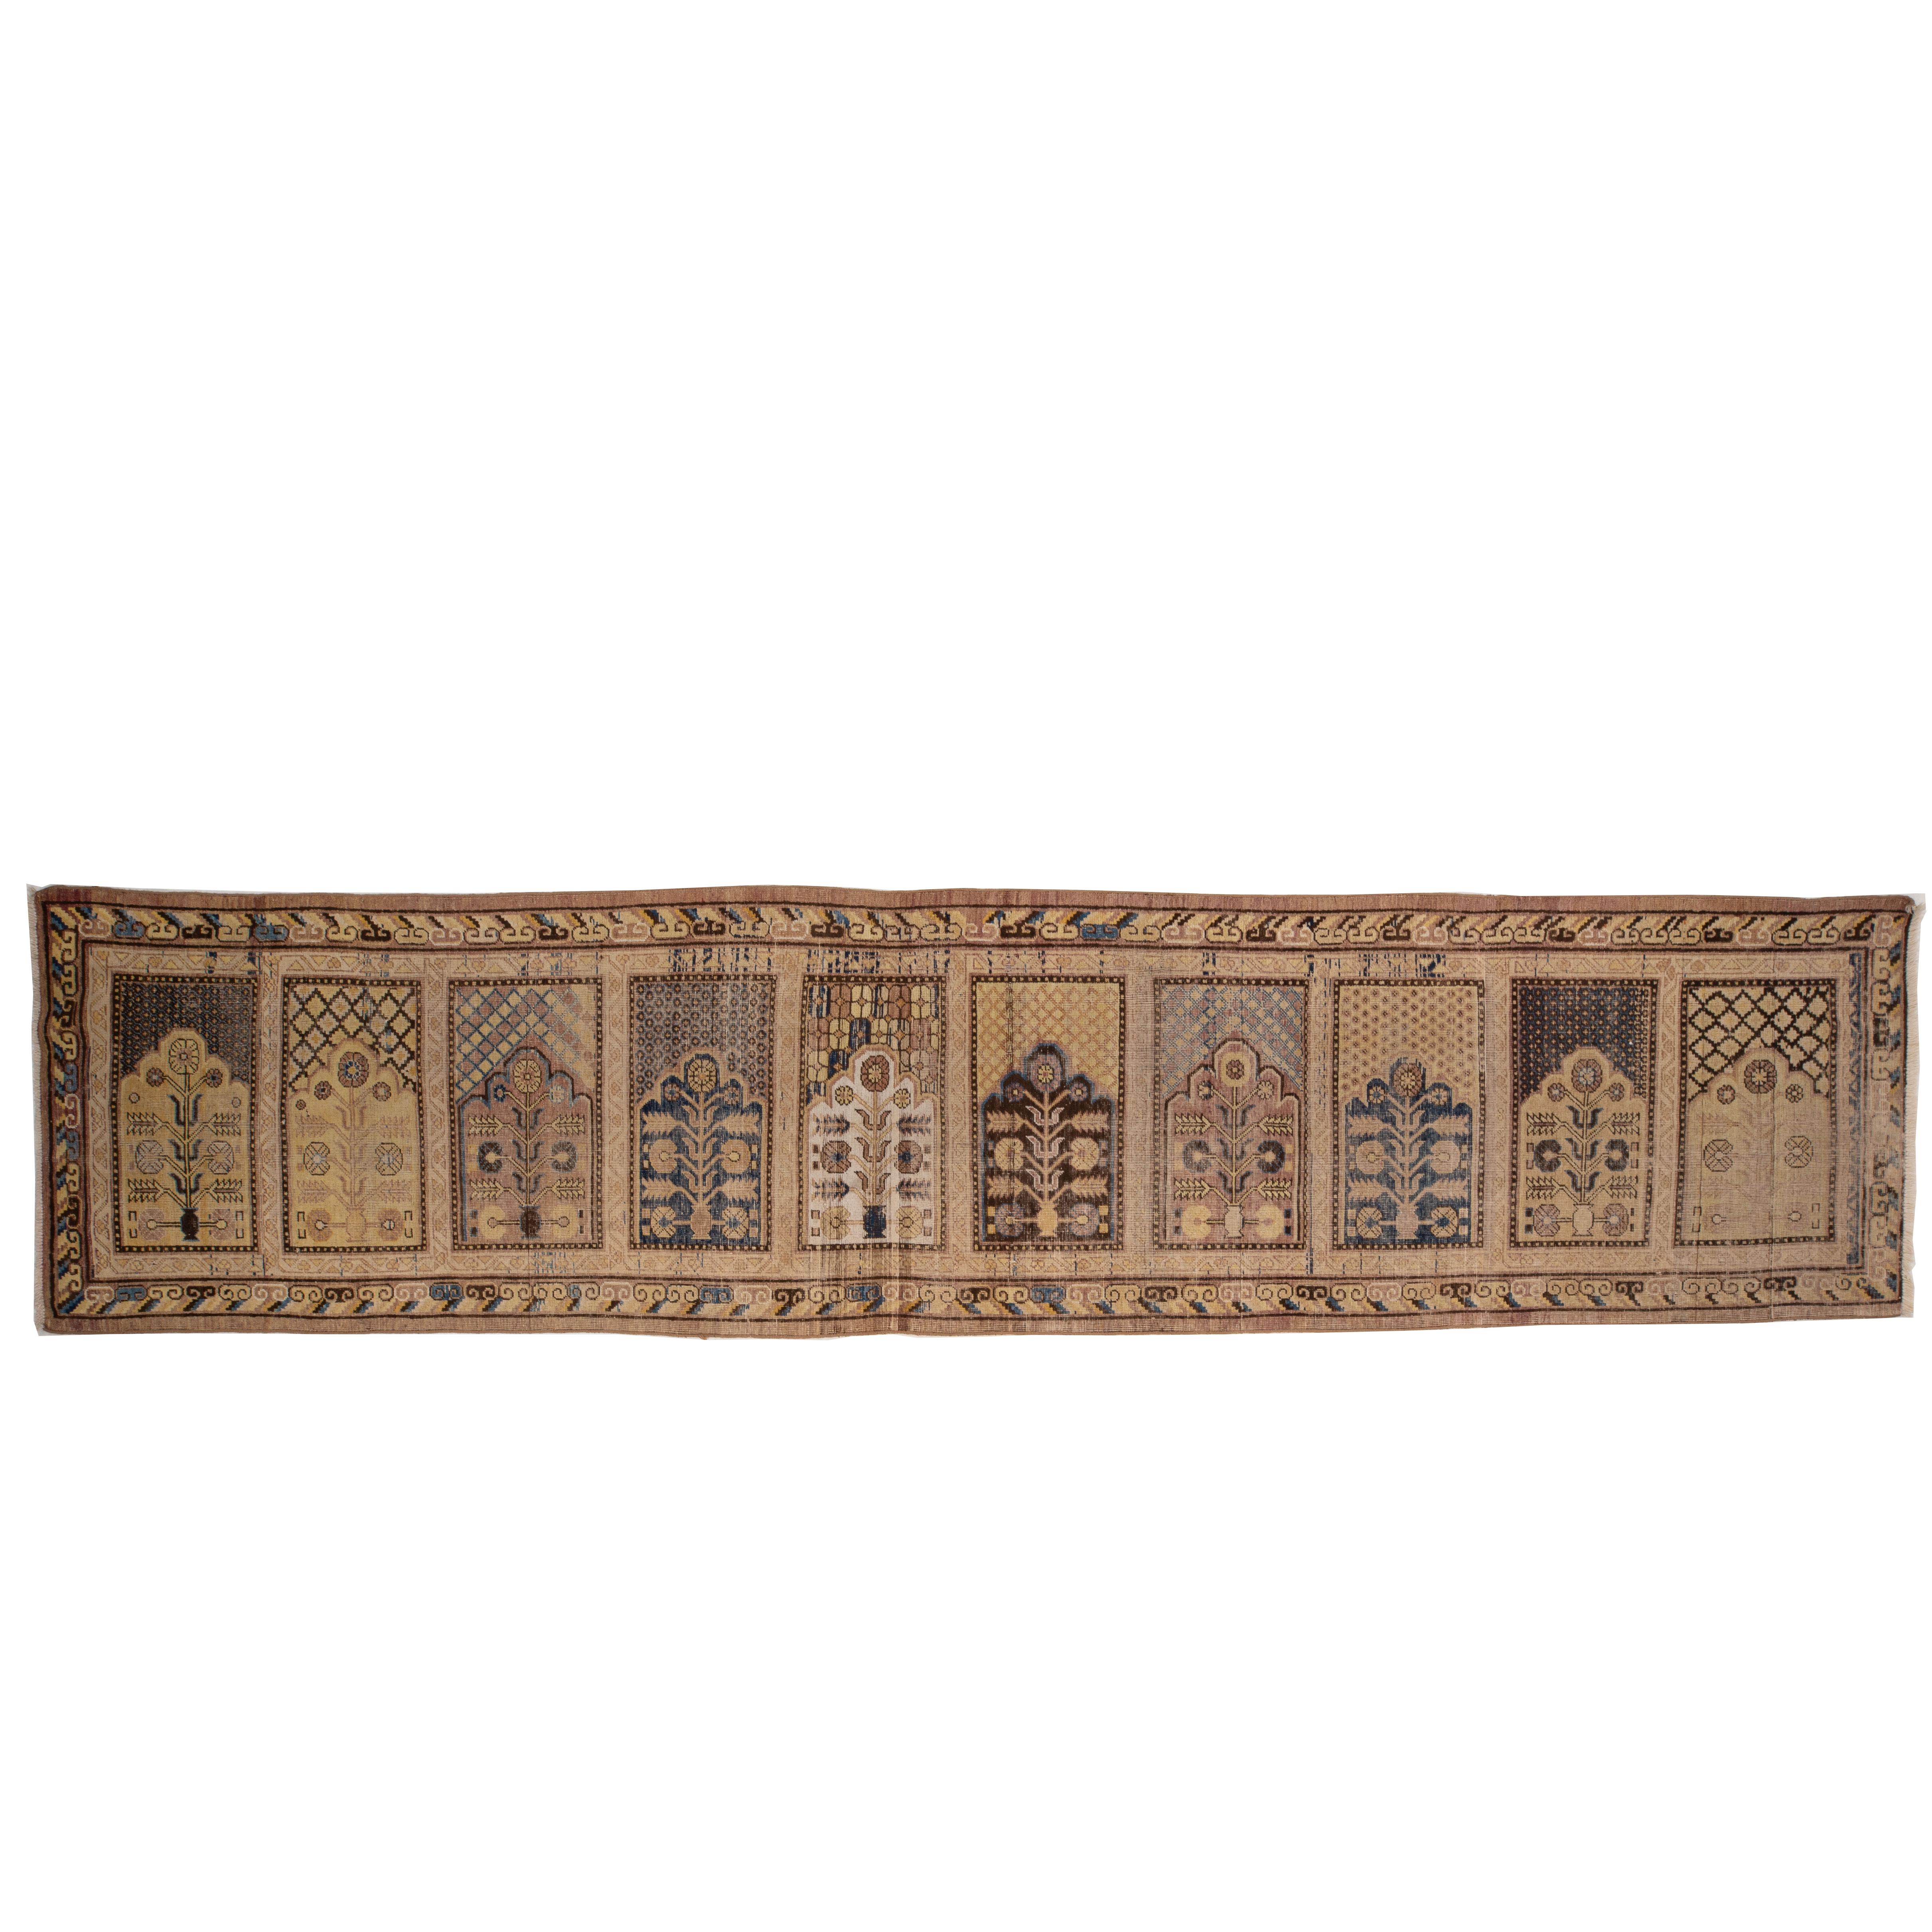 A slightly worn out Khotan rug with soft coloyurs , from the turn of 20th C.
